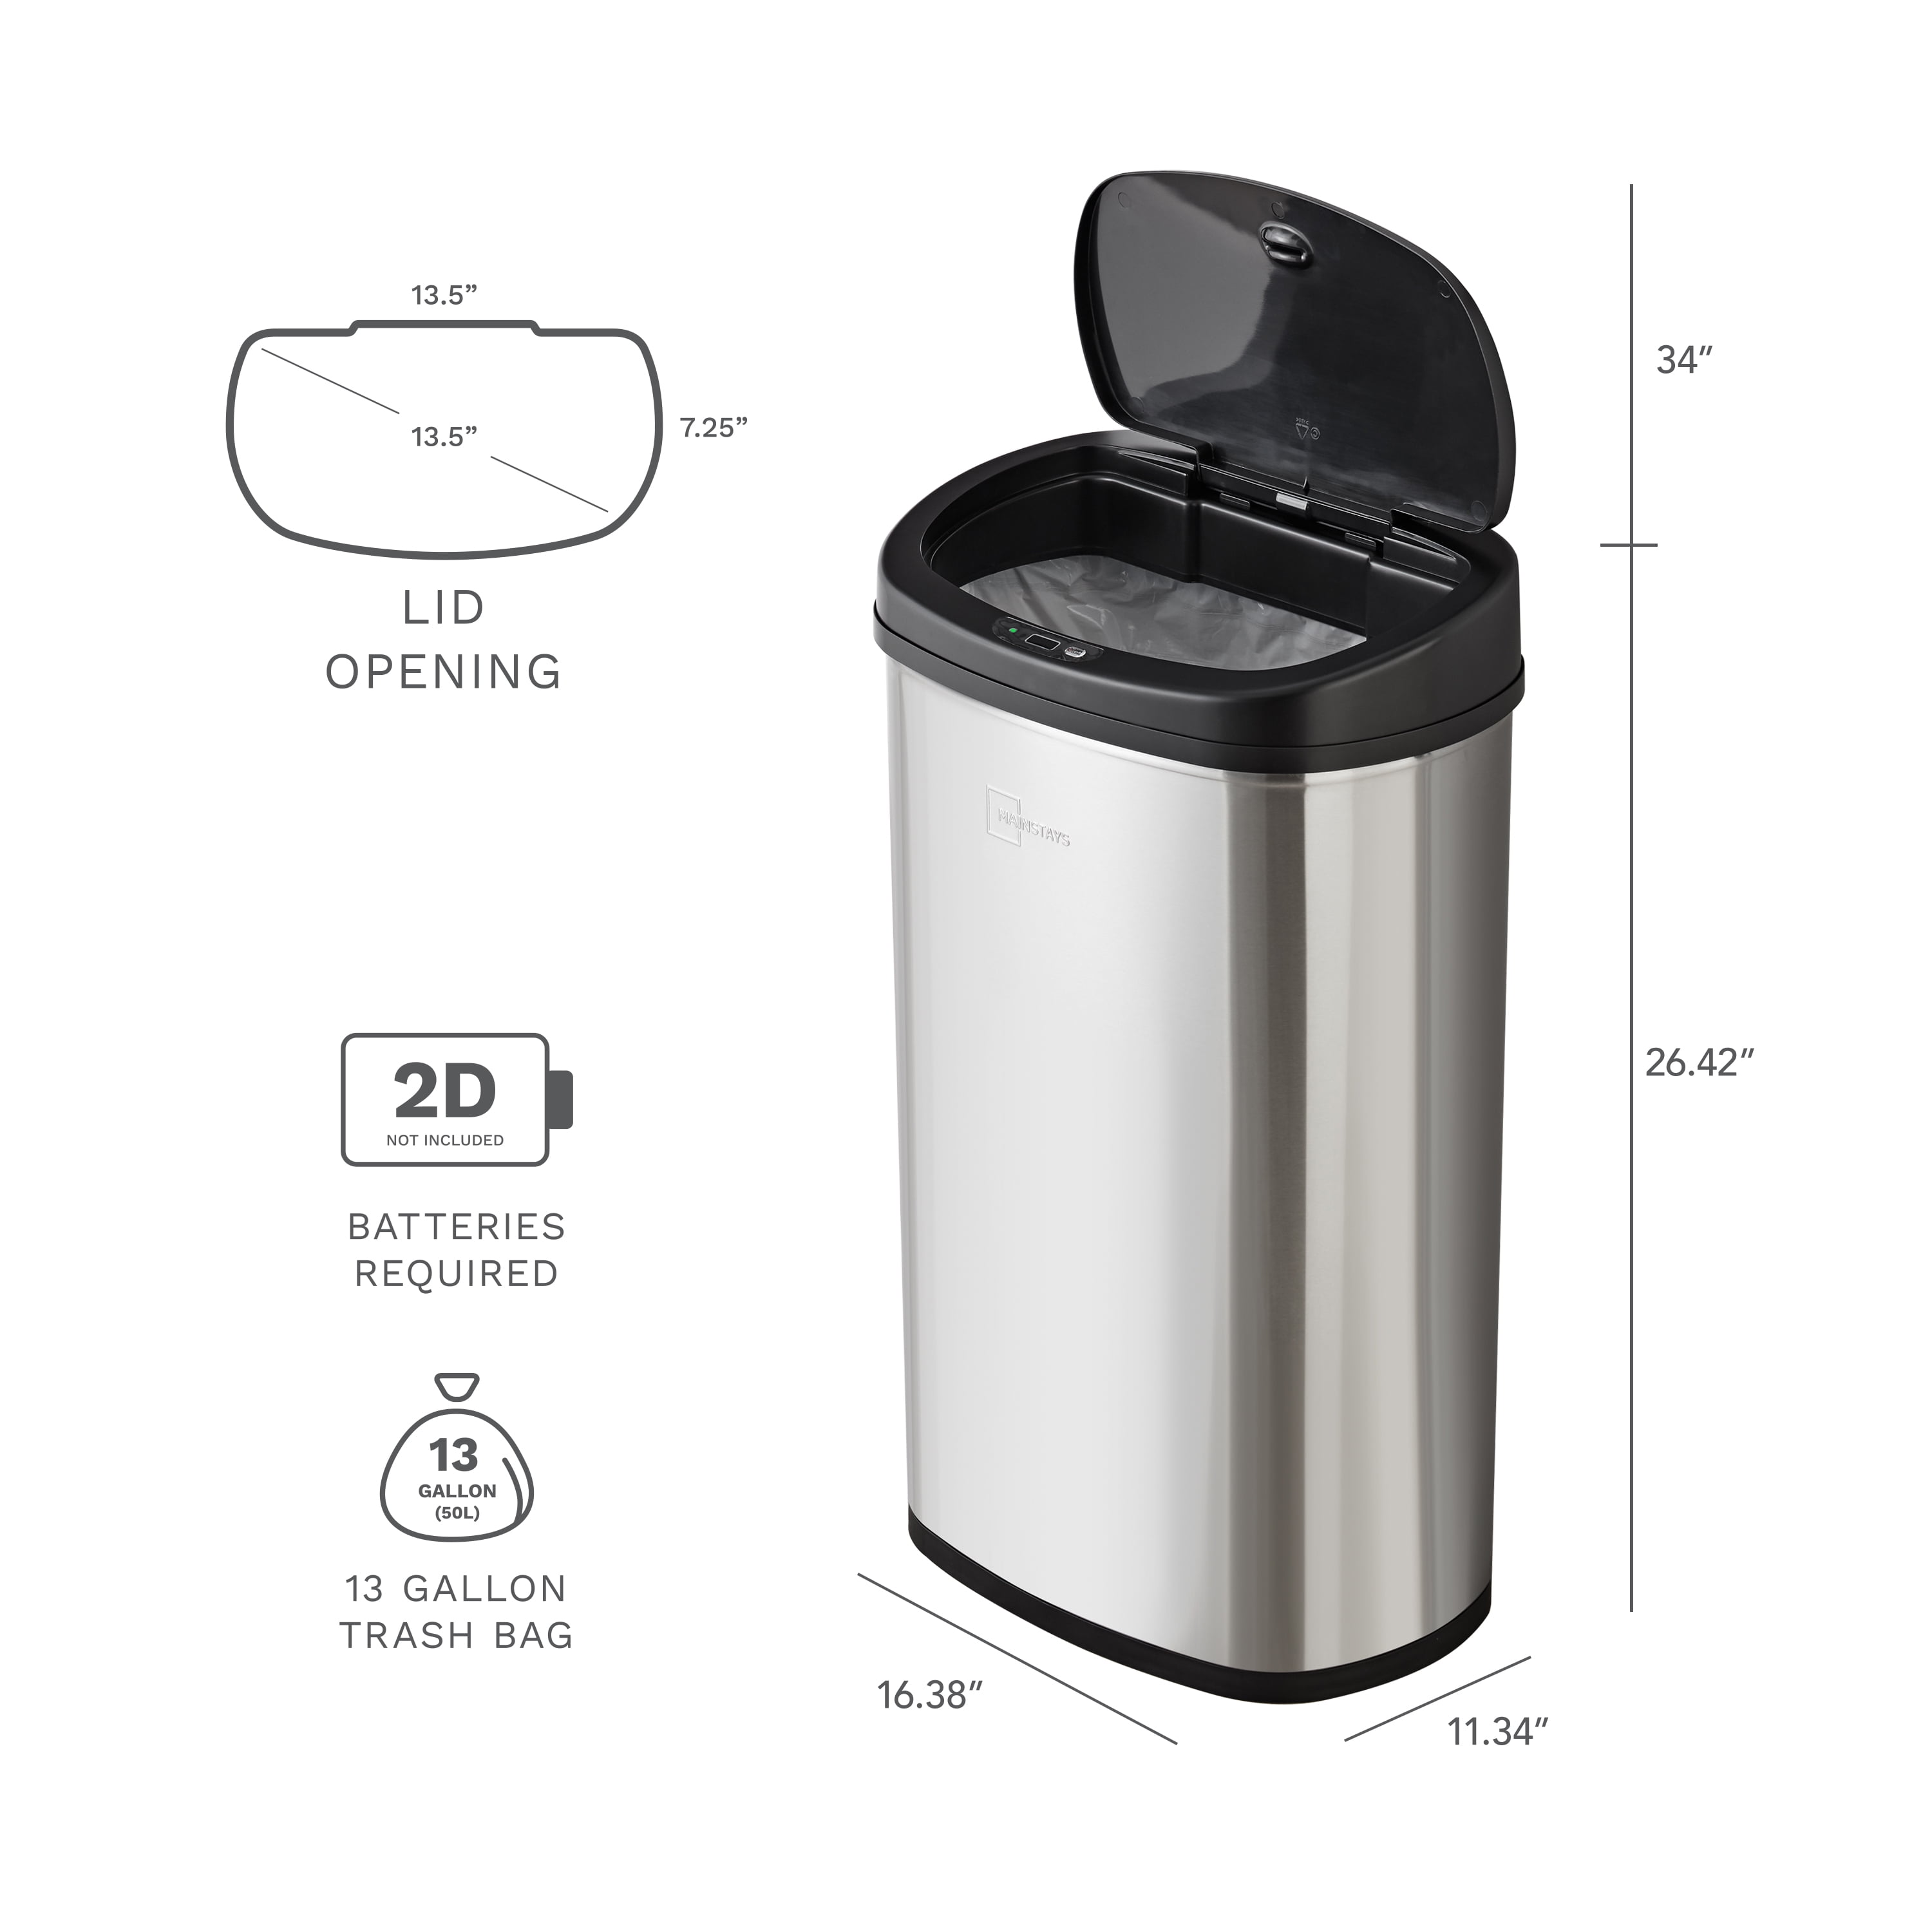 Innovaze 13 Gal. /50 l Stainless Steel Oval Motion Sensor Kitchen Trash Can  MGCS-AS2008 - The Home Depot